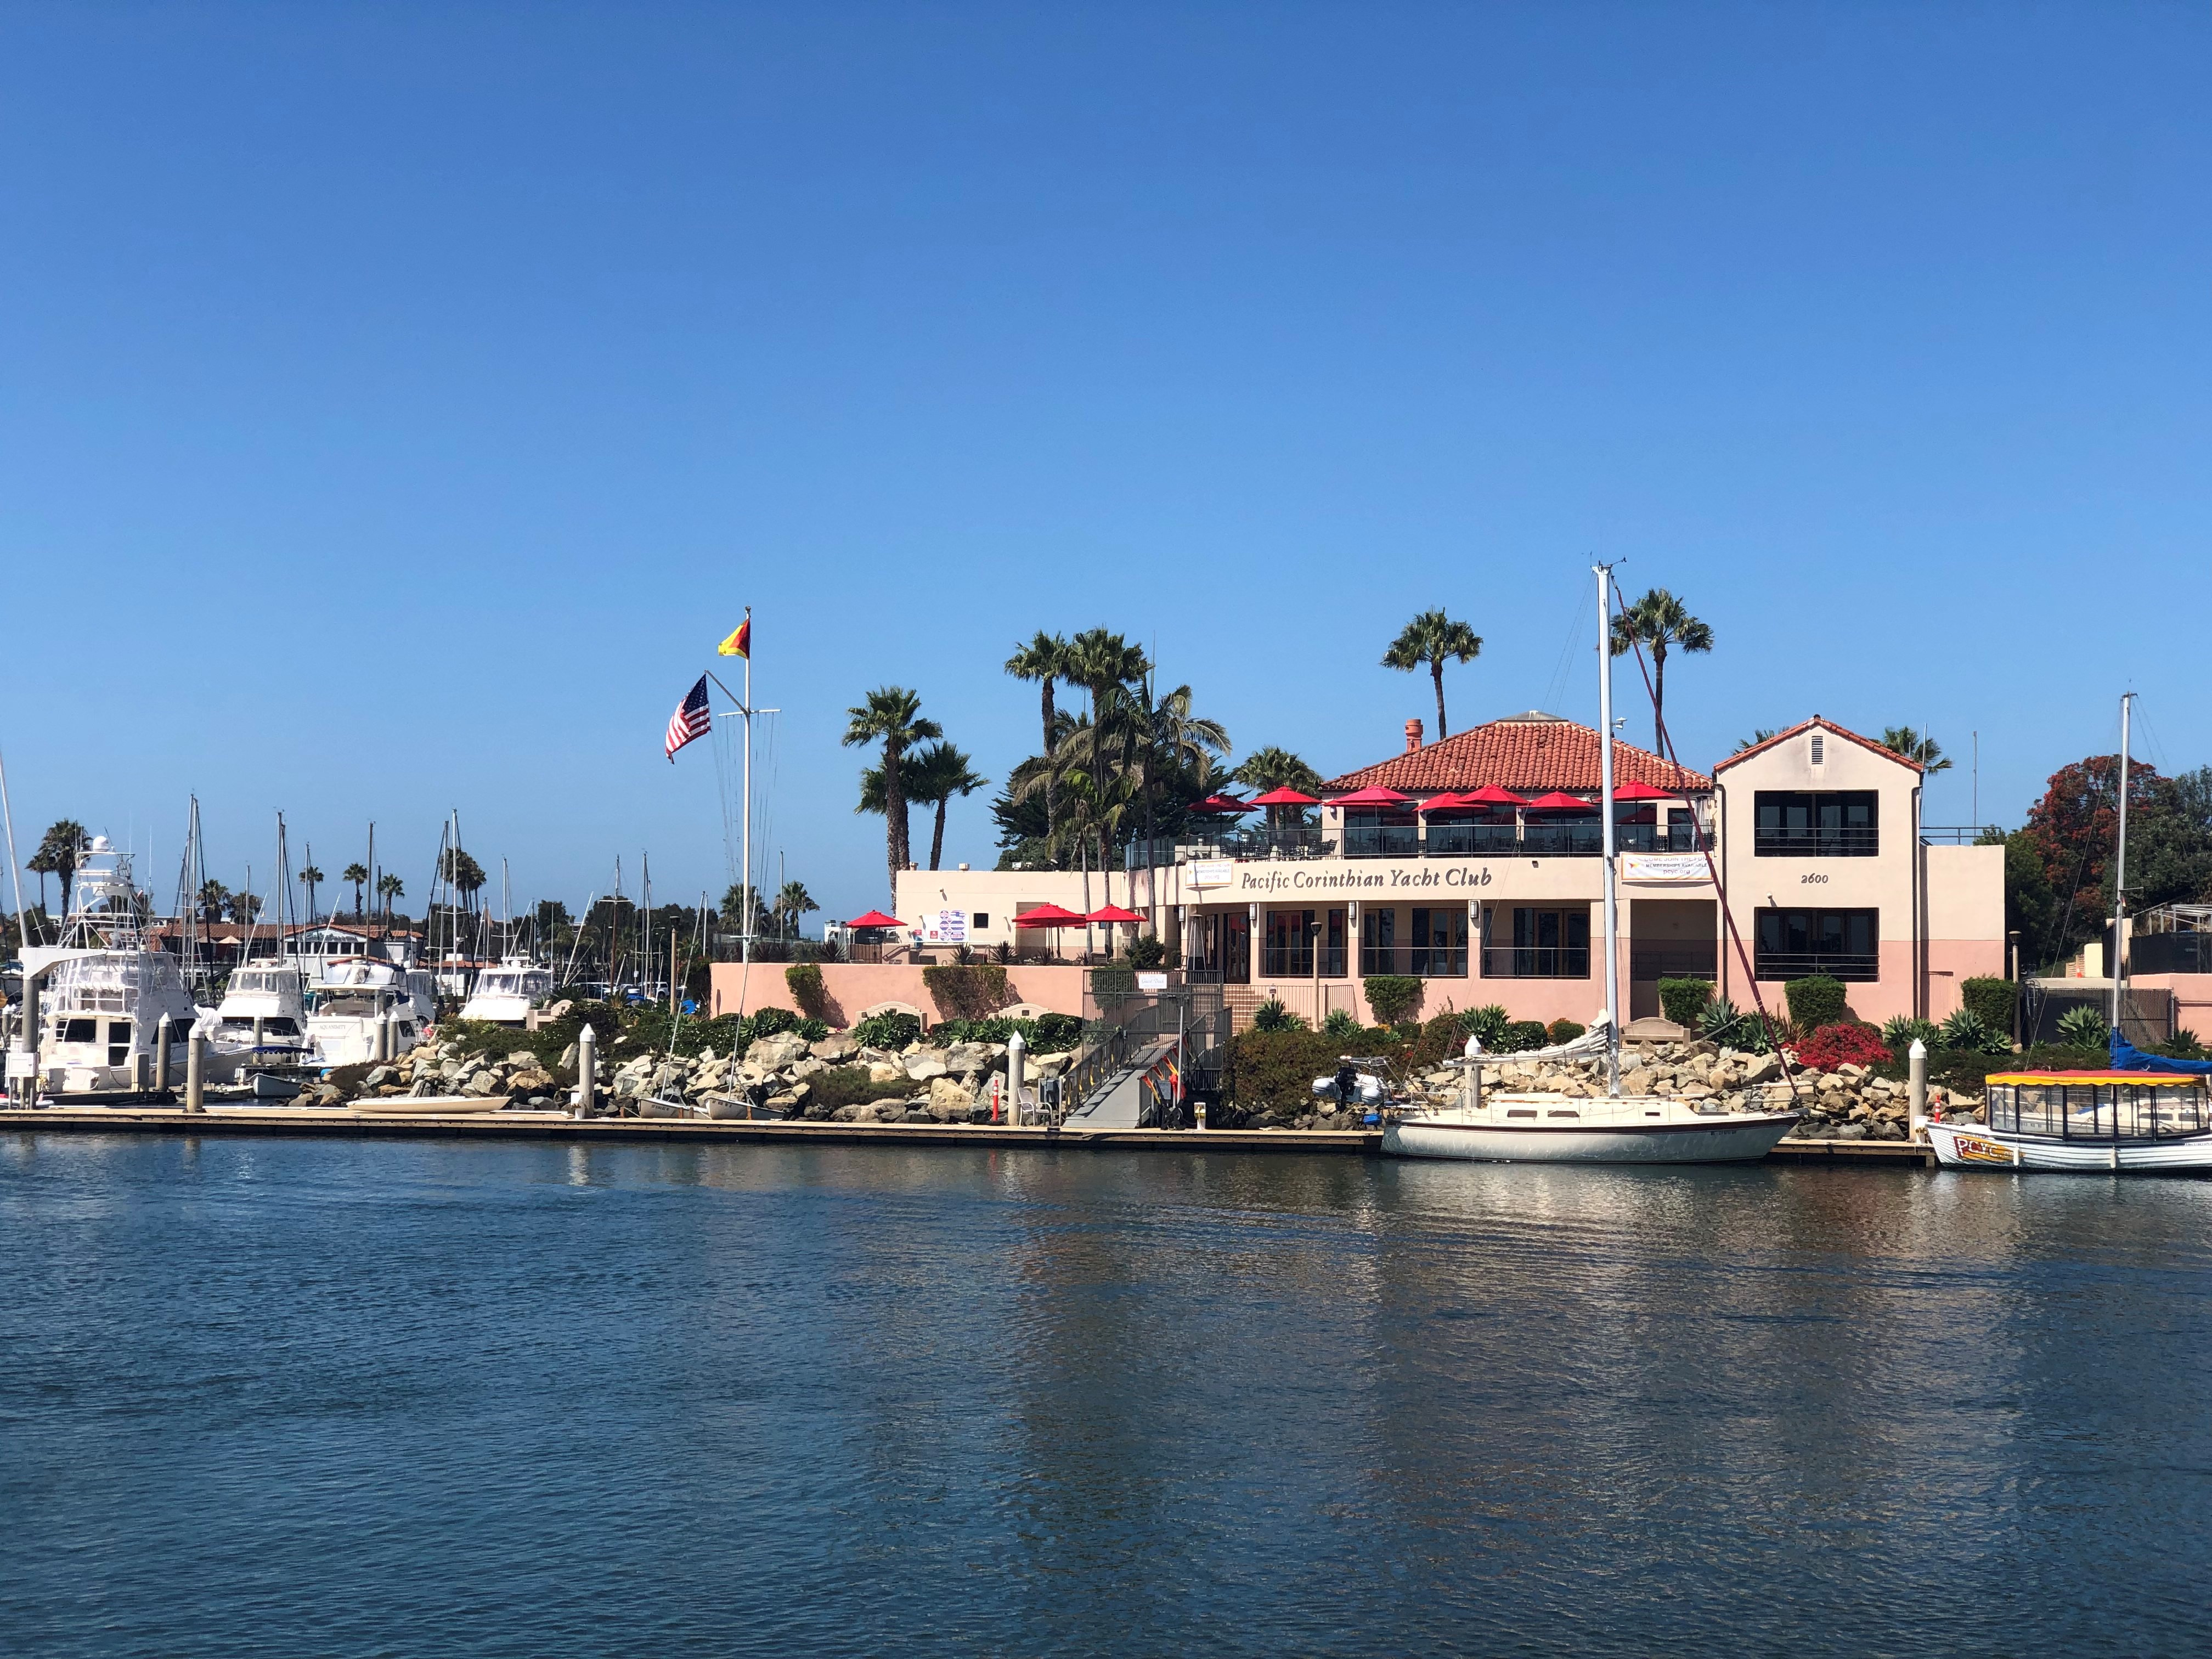 A view from the water of the Pacific Corinthian Yacht Club